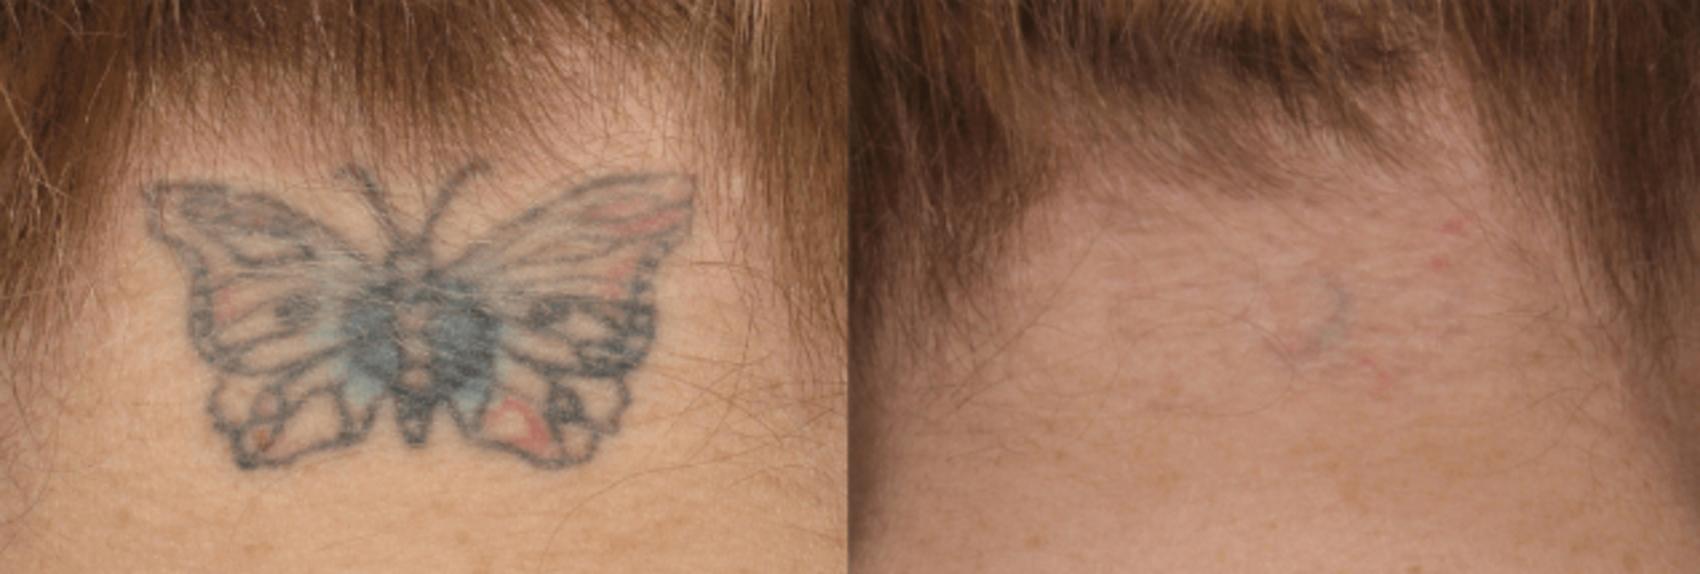 Tattoo Removal  Premier Body and Laser